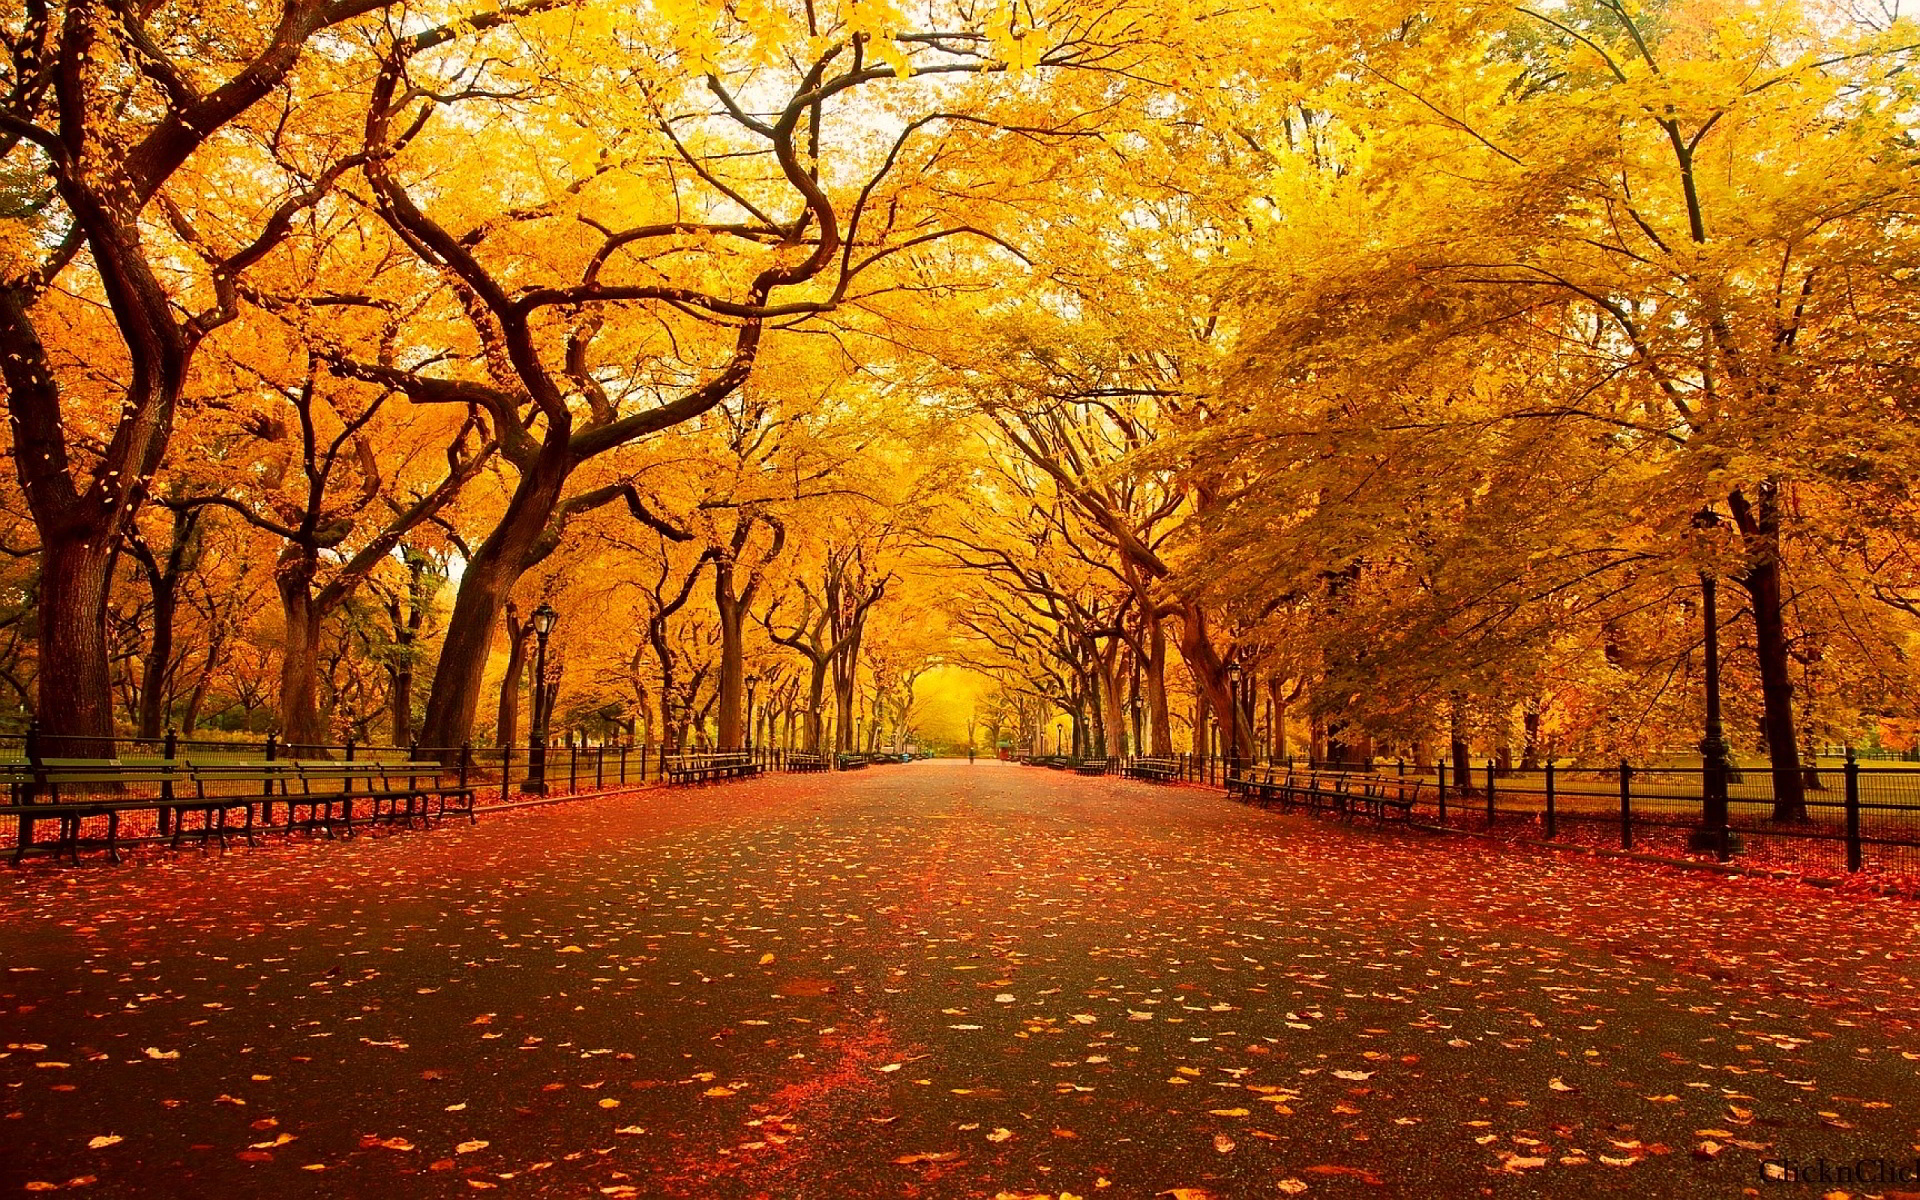 Road Autumn Wallpapers HD | Wallpapers, Backgrounds, Images, Art ...